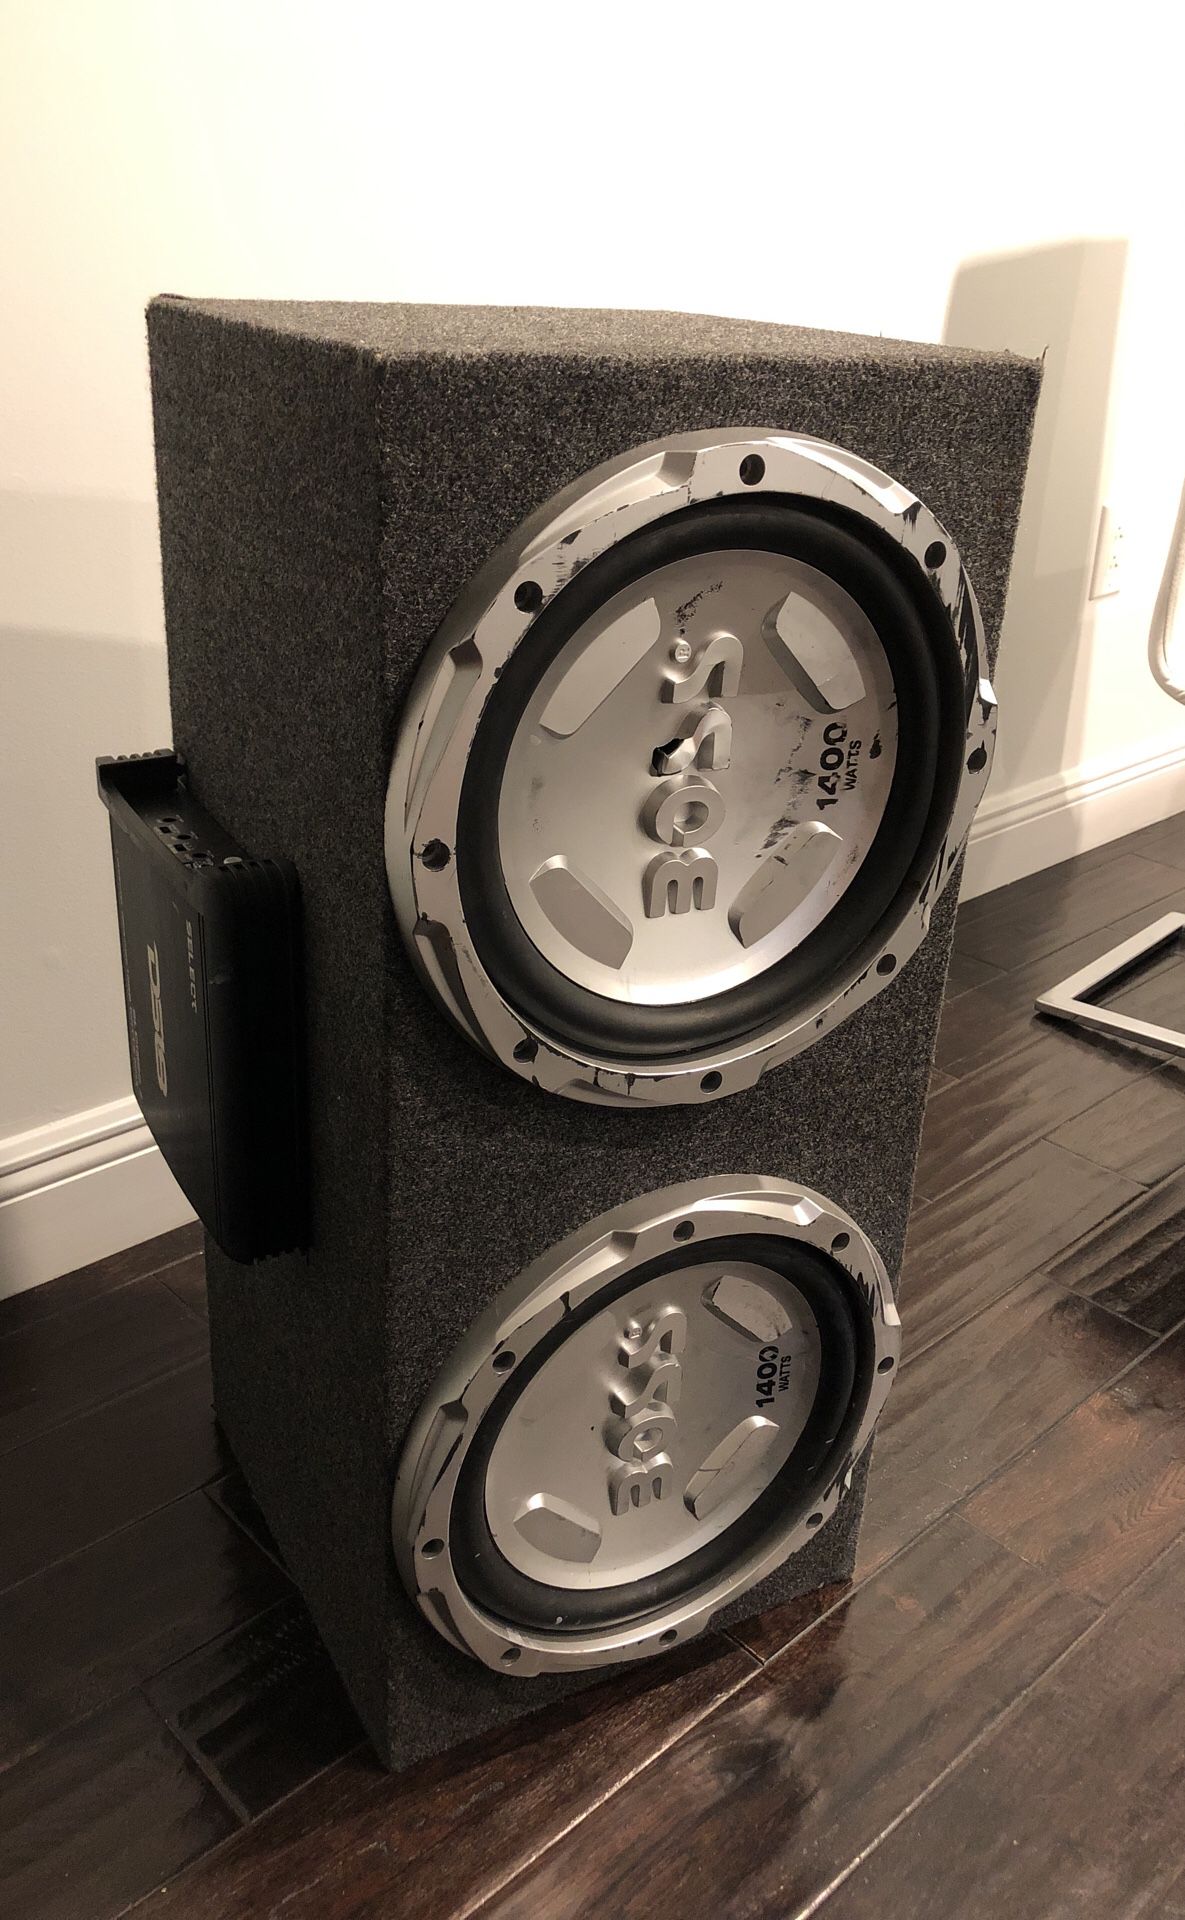 2 12” Boss subwoofers with box and 1000 watt amp